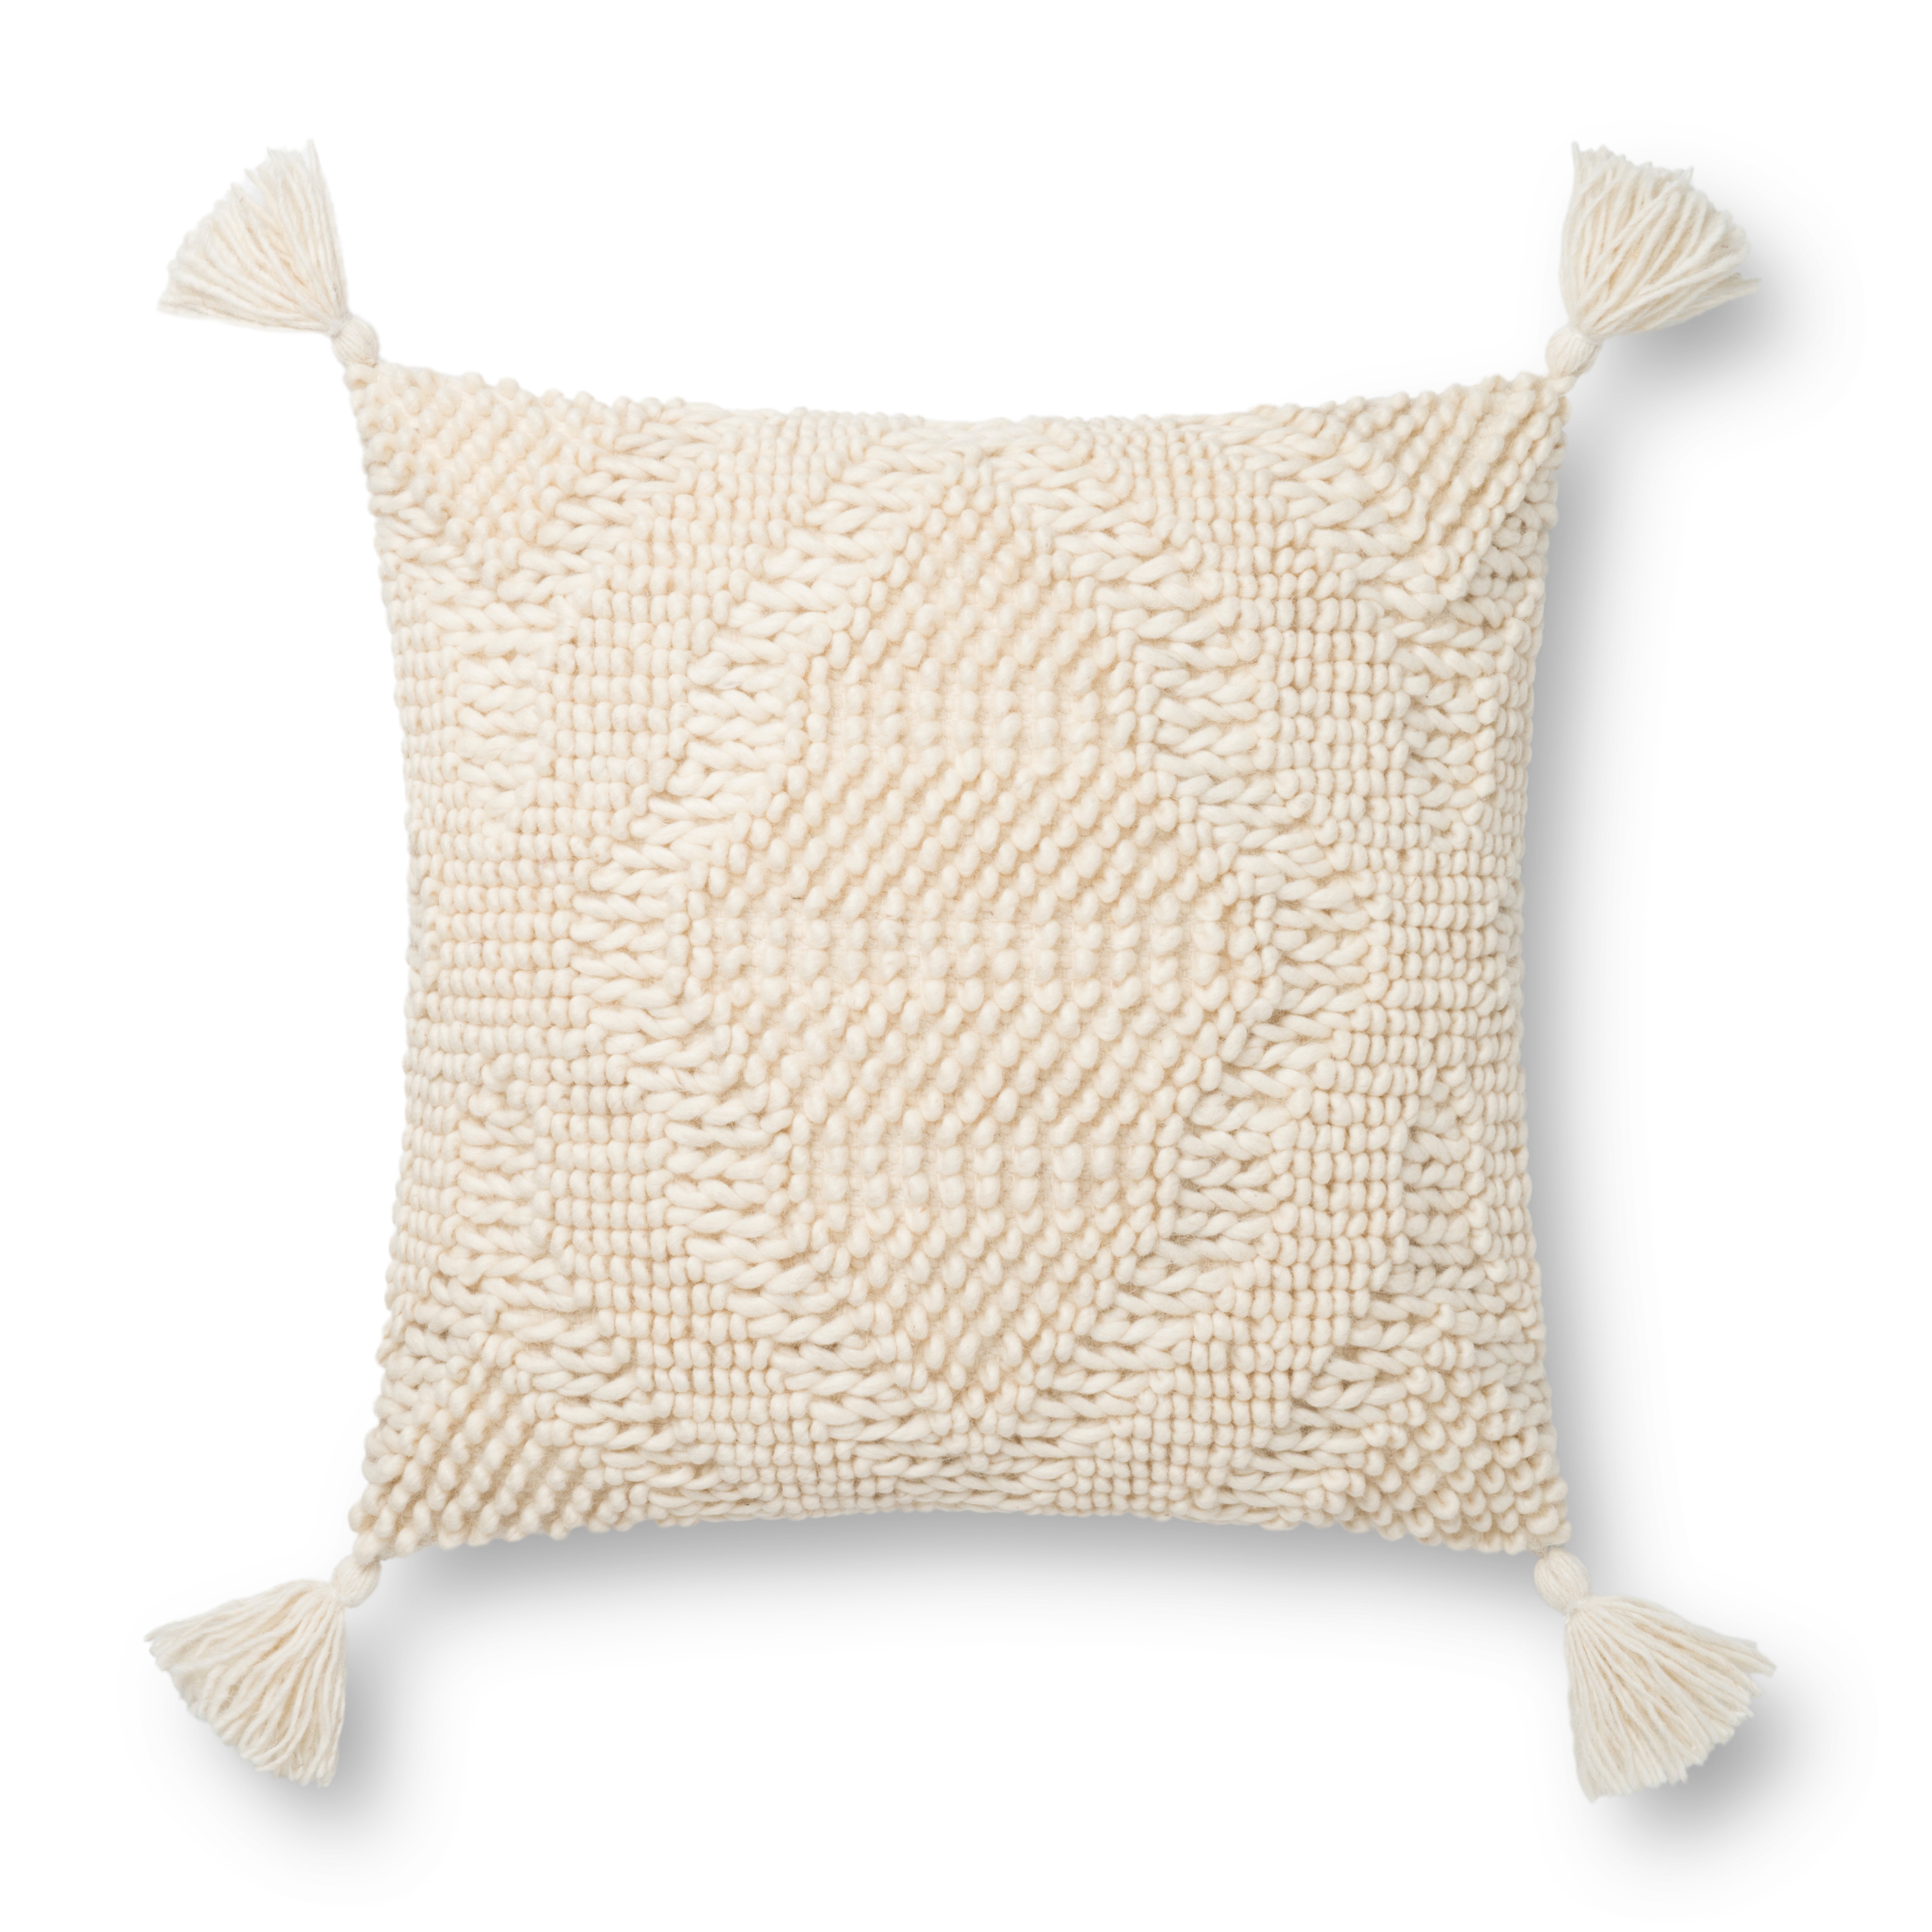 Woven Pattern Throw Pillow with Tassels, 18" x 18", Ivory - Image 0